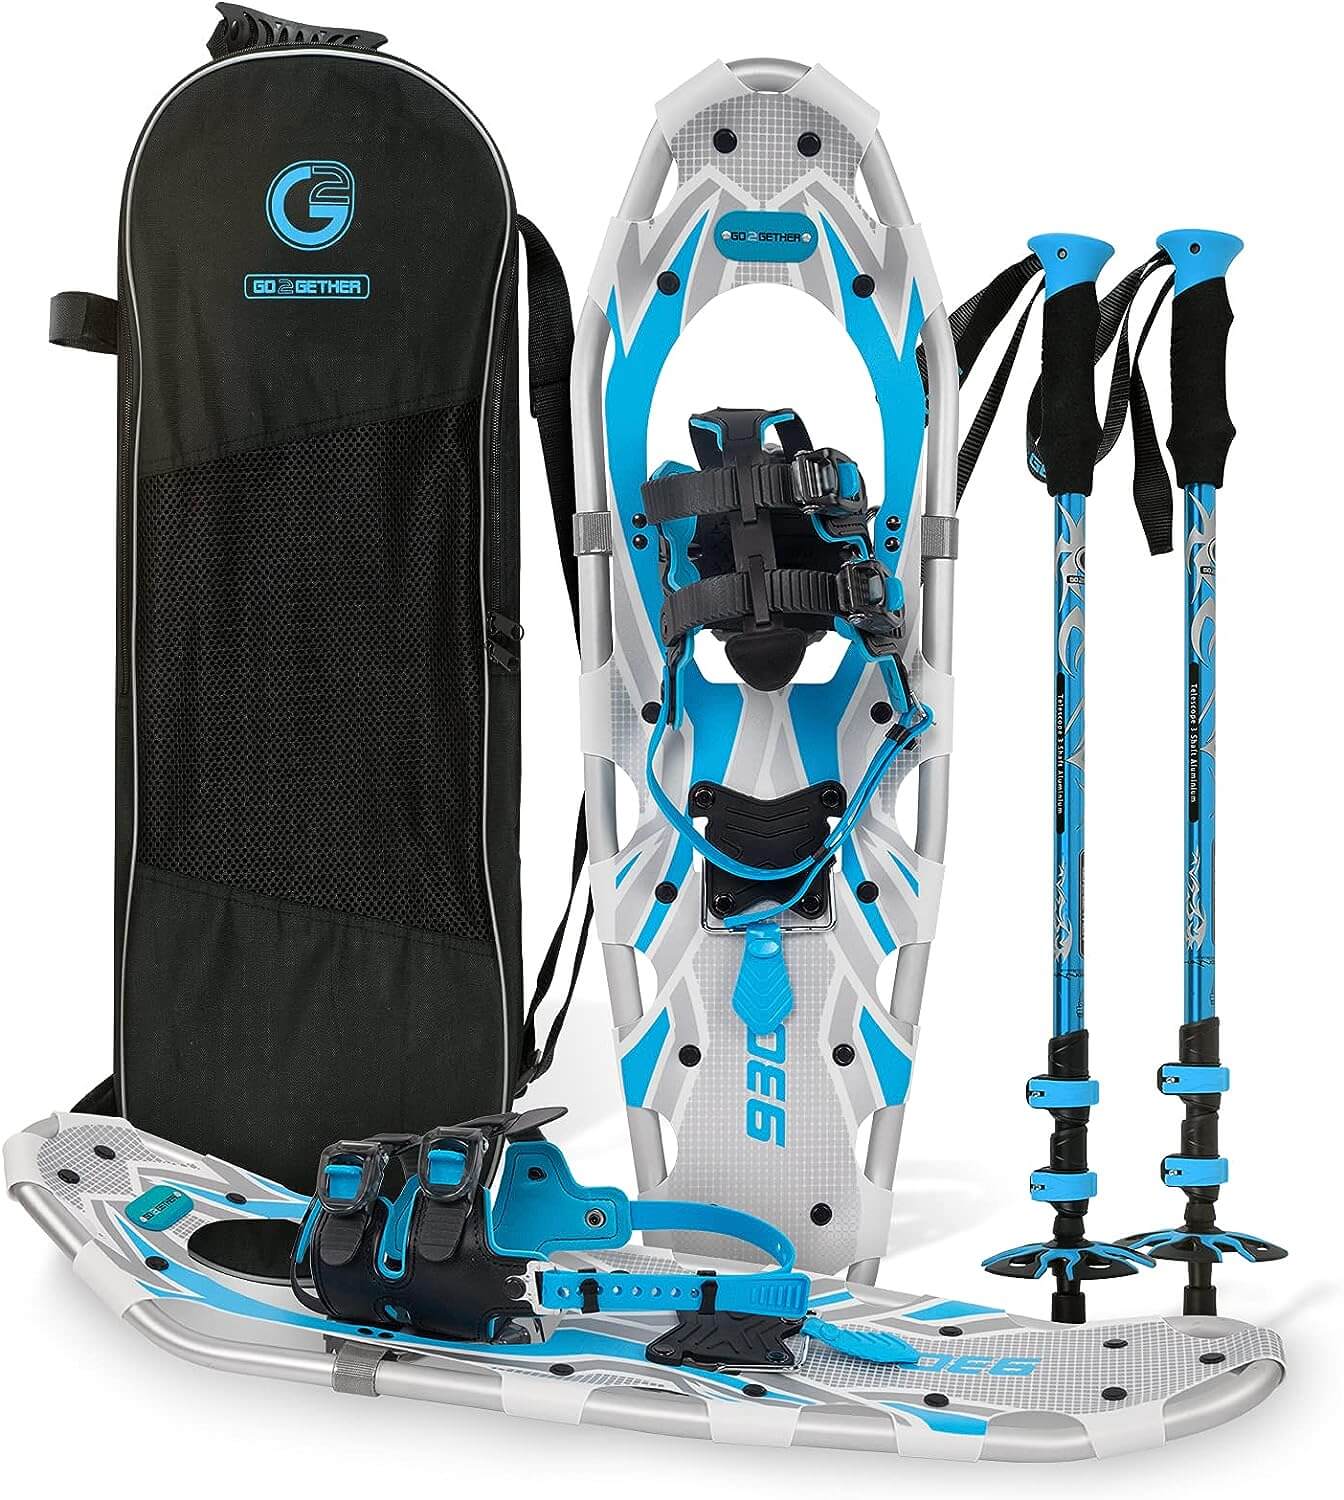 Shop The Latest >G2 Light Weight Snowshoes with Trekking Poles & Carrying Bag > *Only $160.64*> From The Top Brand > *G2 GO2GETHERl* > Shop Now and Get Free Shipping On Orders Over $45.00 >*Shop Earth Foot*